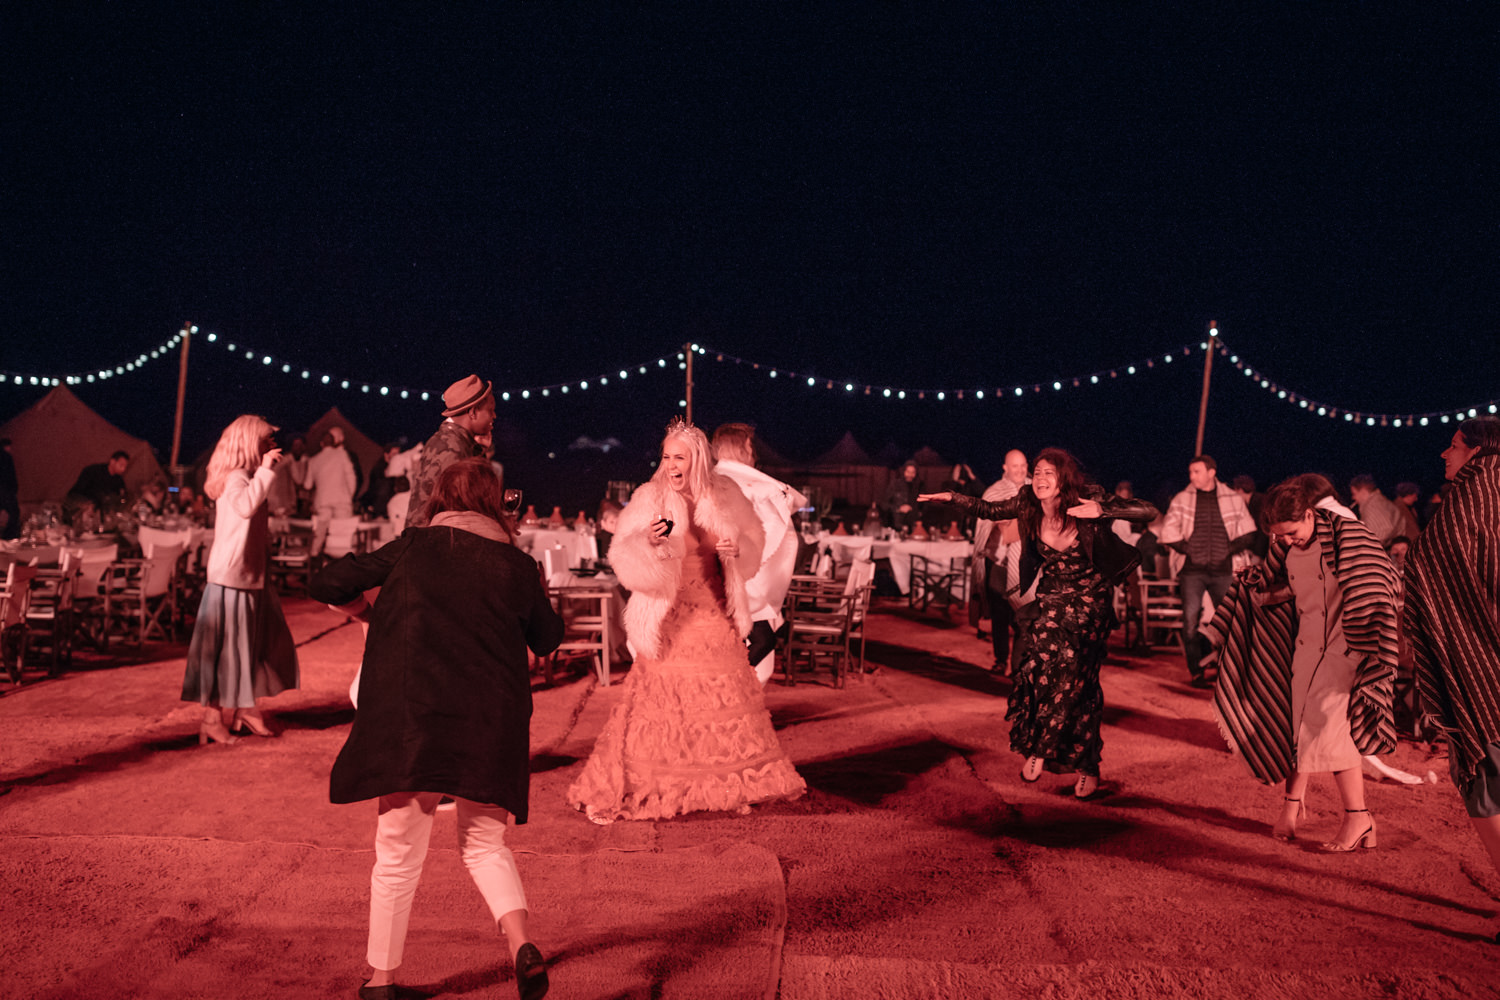 party time during a wedding in the desert in Morocco